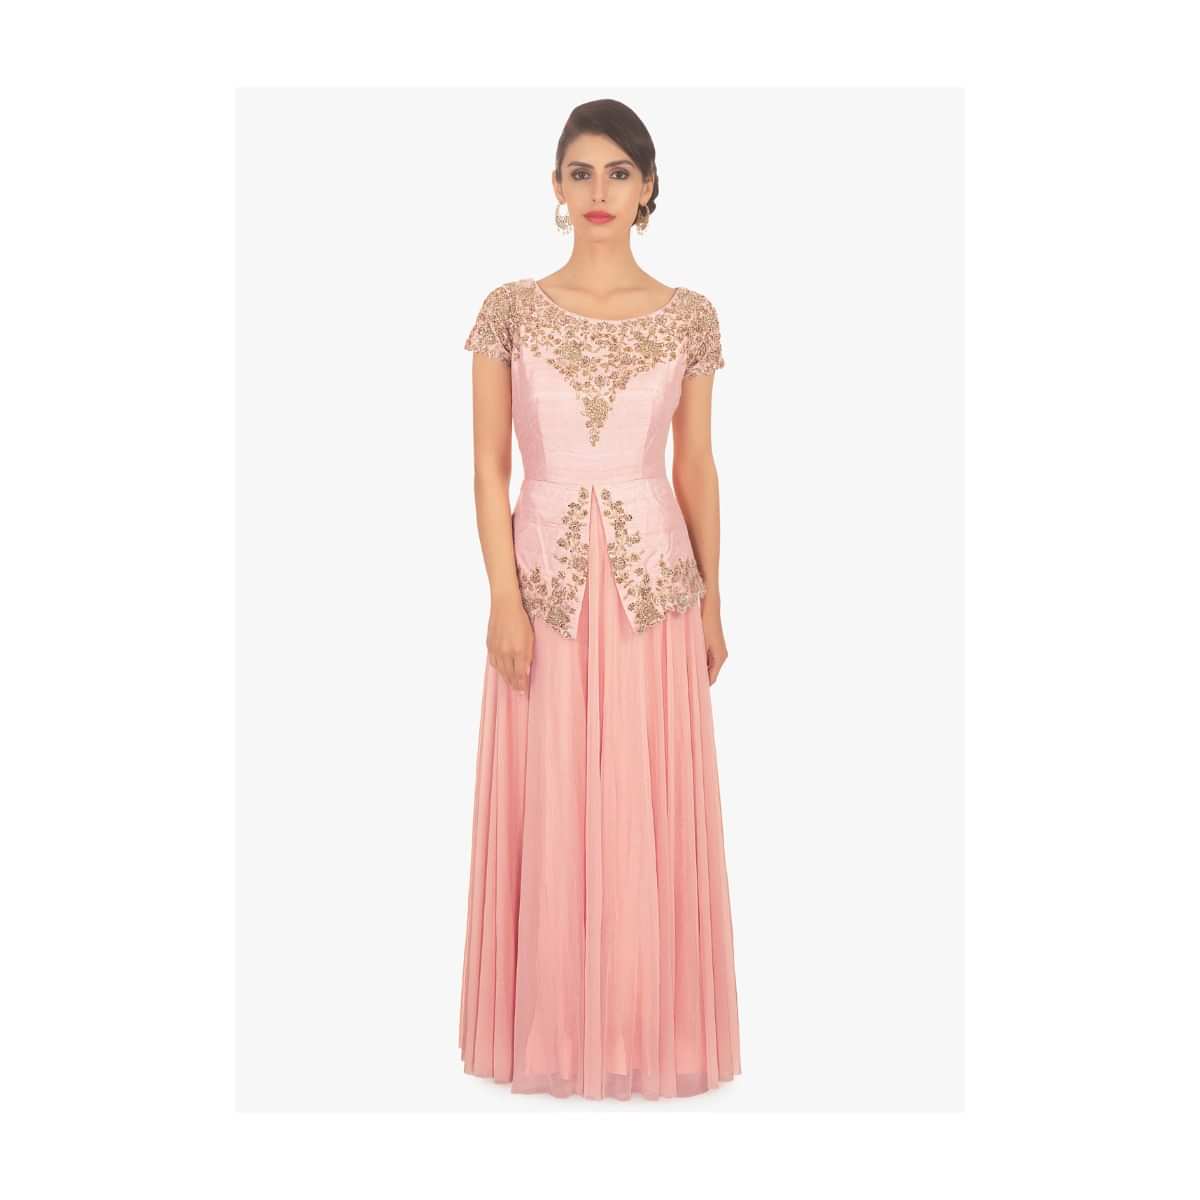 Peach long dress with pink bodice in peplum style only on Kalki